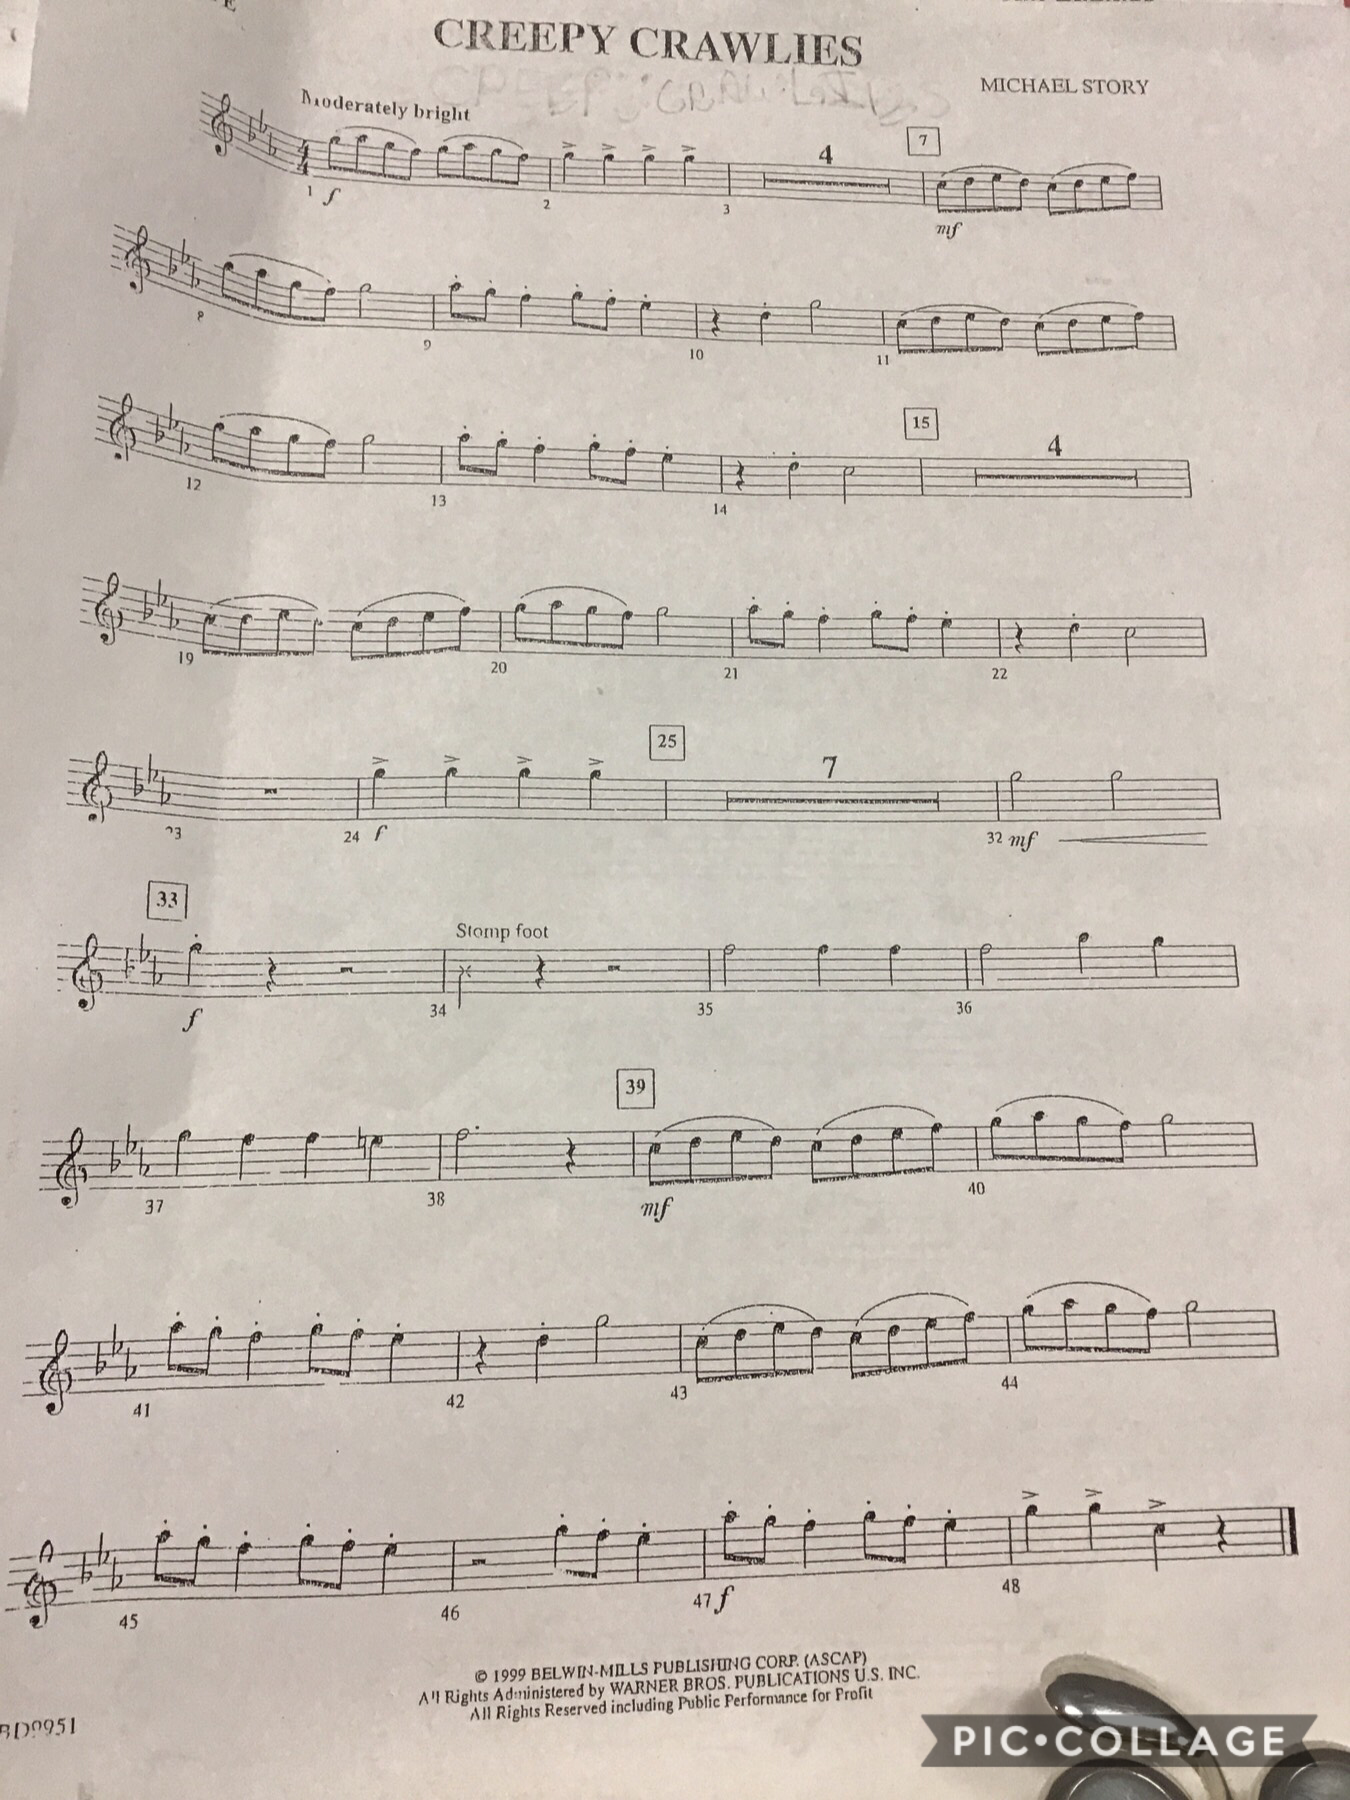 This is my flute music and what I’m going to be playing at my school, who can read it?